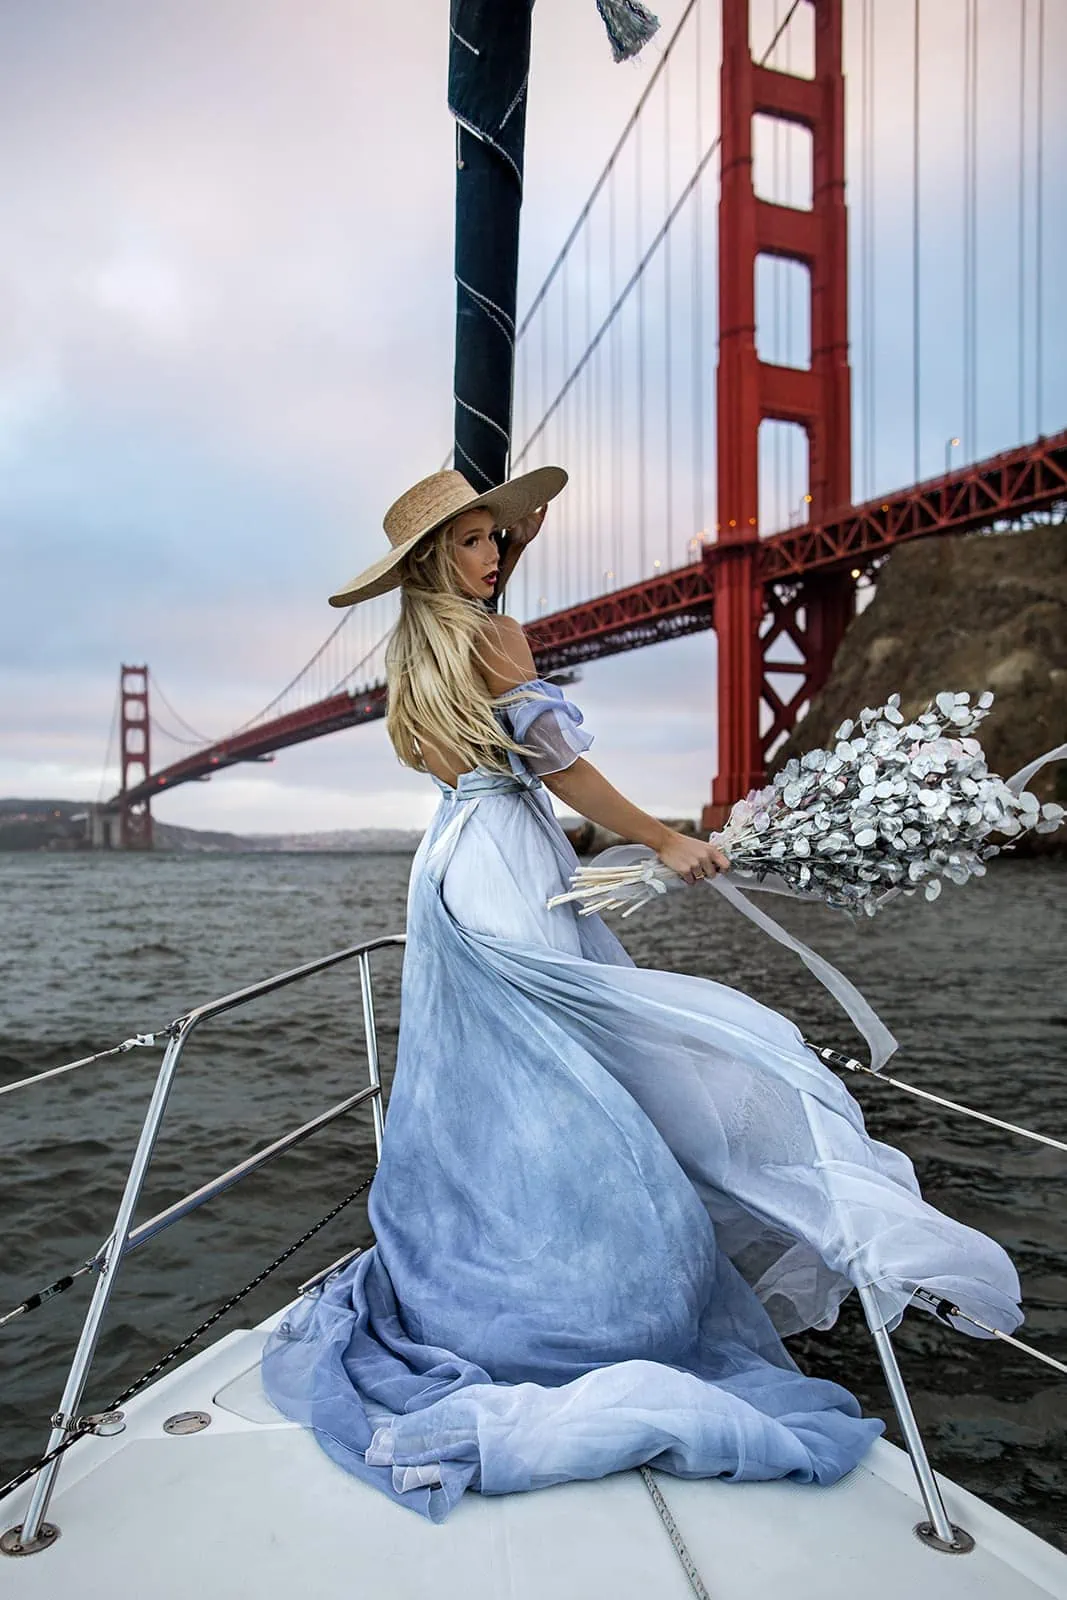 Woman wearing Leanne Marshall bridal dress on sailboat in San Francisco